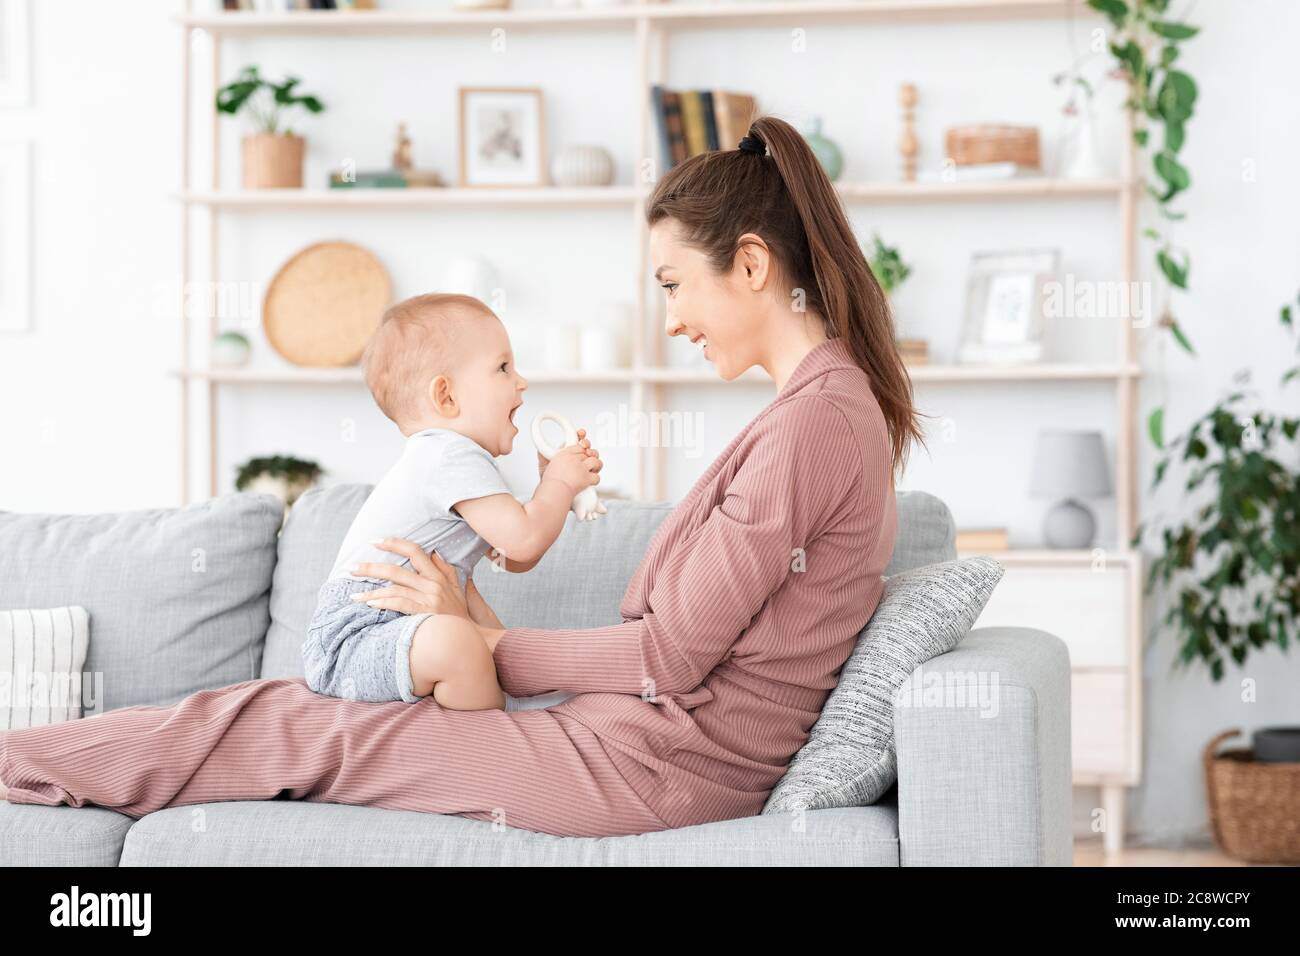 Happy loving family. Mother and her toddler baby boy playing at home Stock Photo